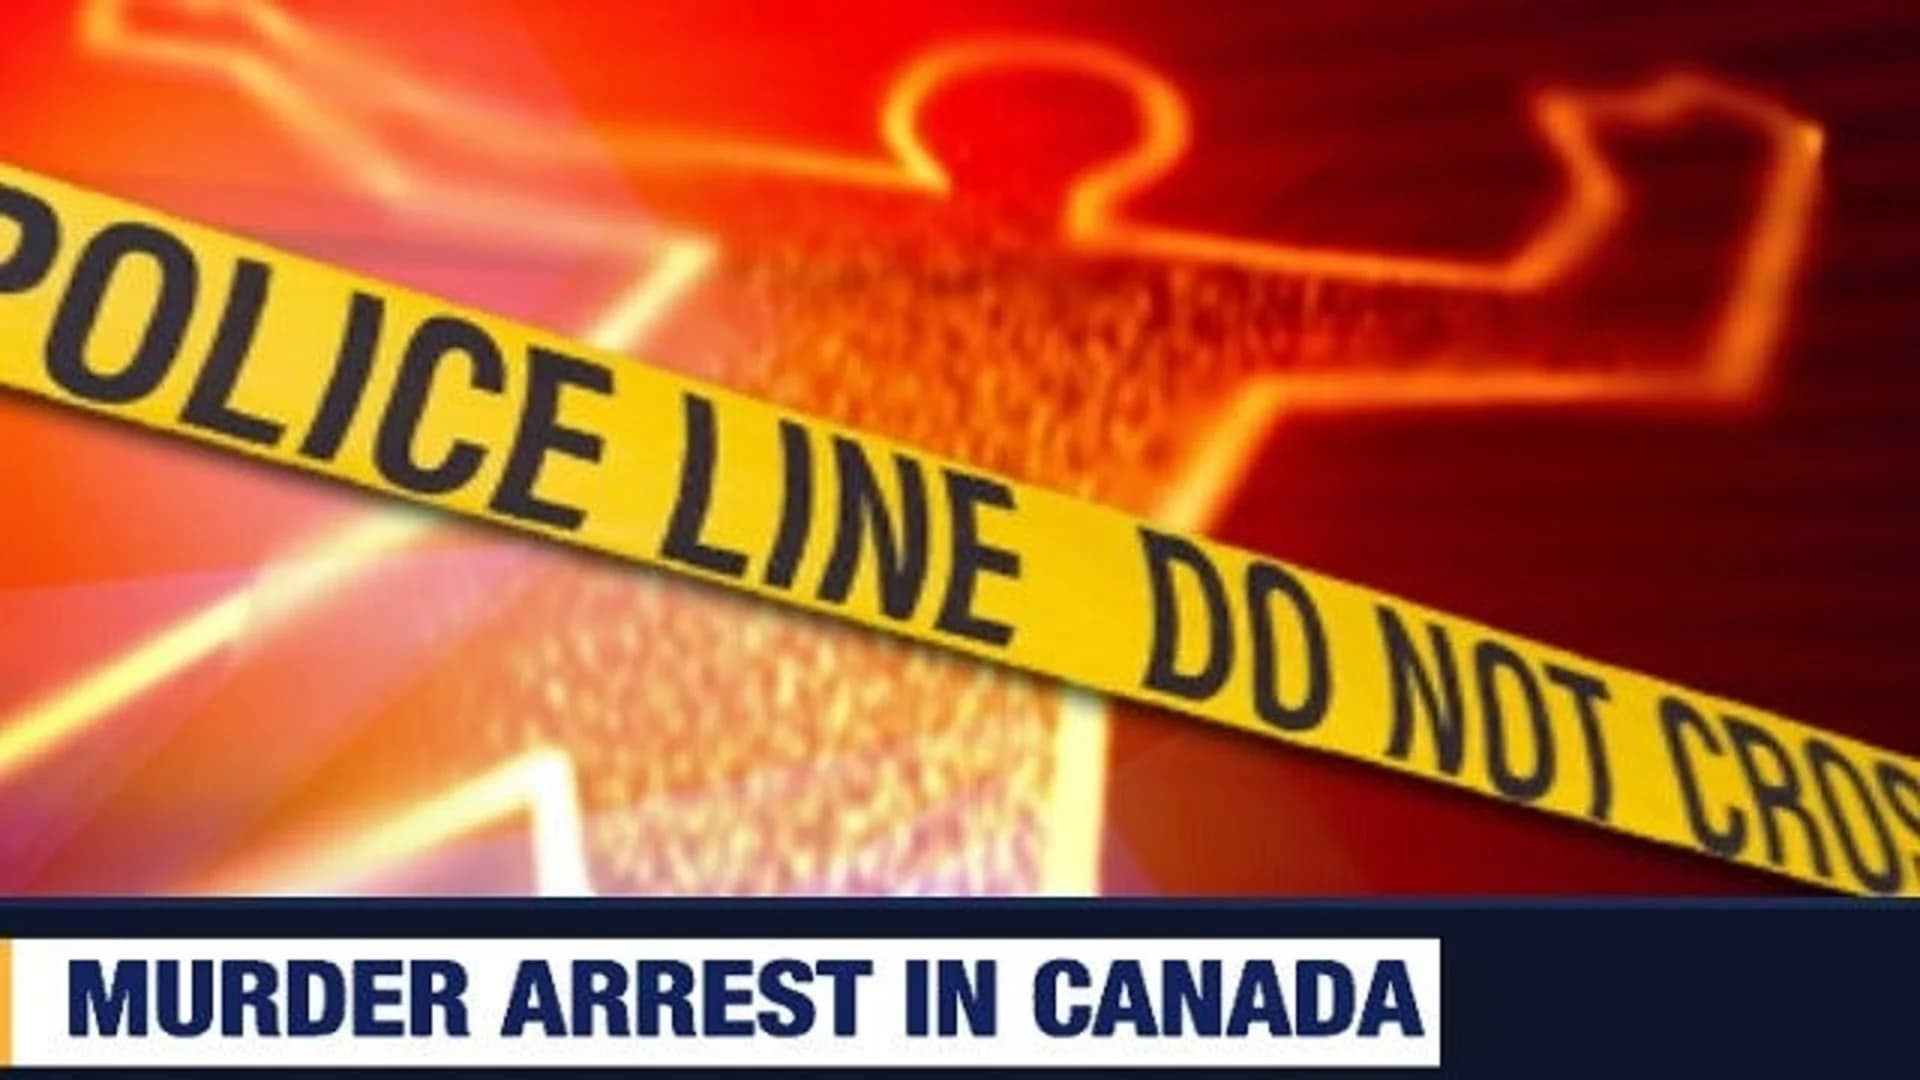 New Jersey man accused of killing sister arrested in Canada